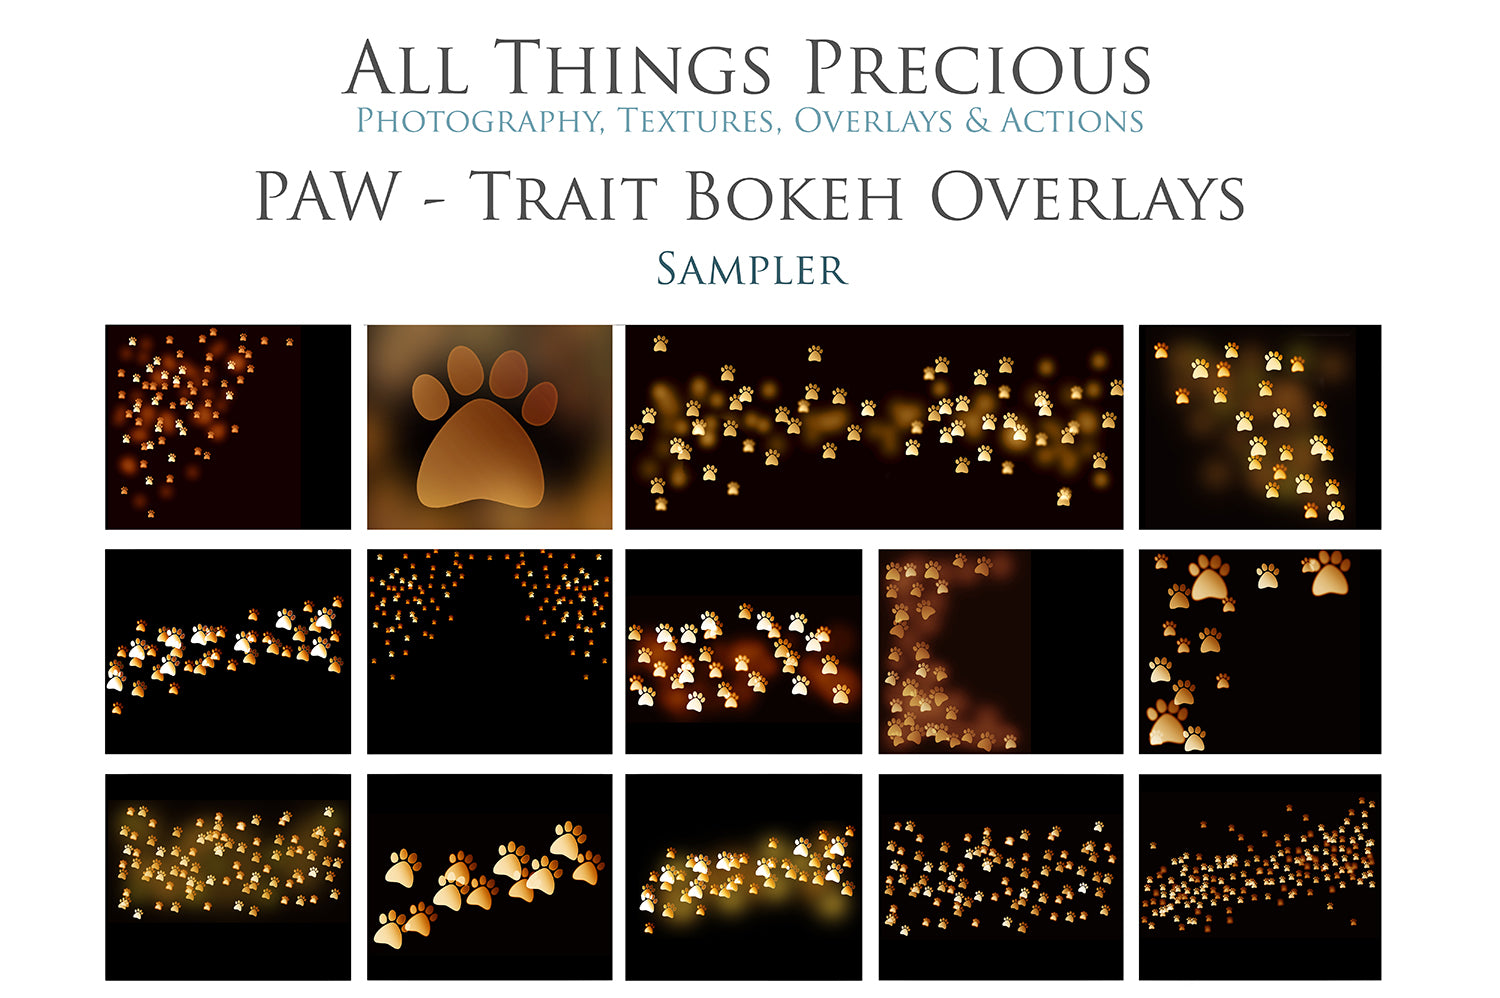 Overlays for photographers, Photoshop editing, digital art, pet photography, pet overlays, dog, paw prints clipart, high resolution by ATP Textures.